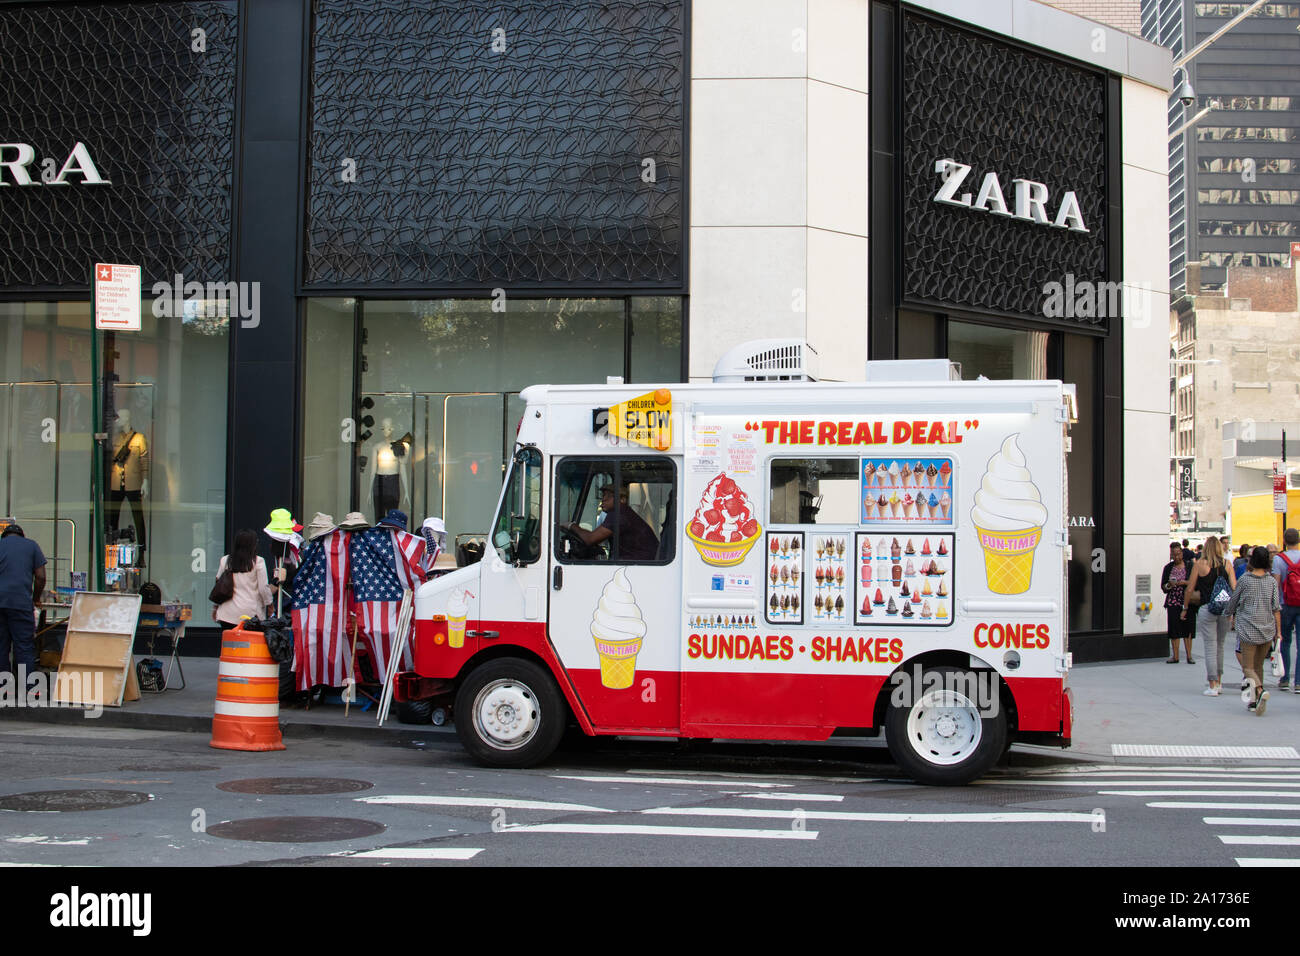 Ice cream trucks delivering sundaes, shakes and cones in front of zara shop, Financial Distict, Lower Manhattan, New York City, NYC, USA Stock Photo